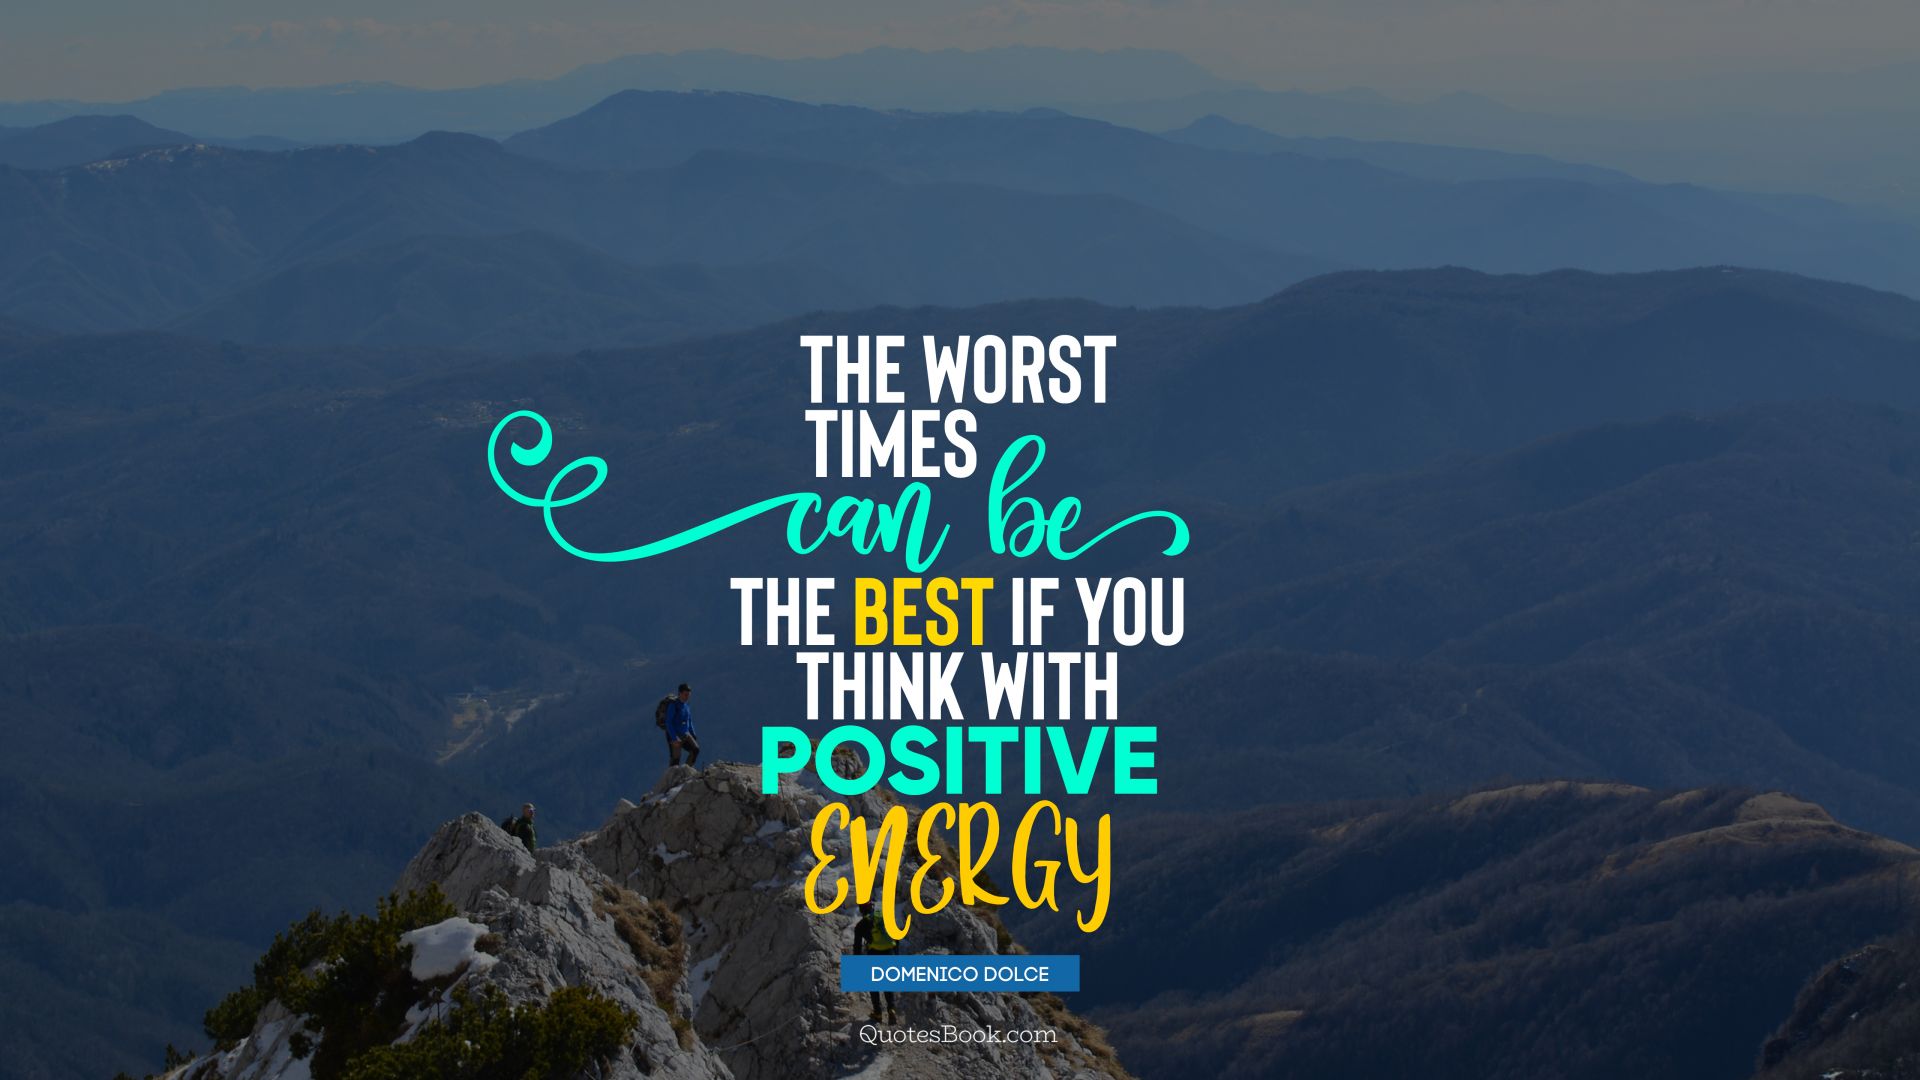 The worst times can be the best if you think with positive energy. - Quote by Domenico Dolce